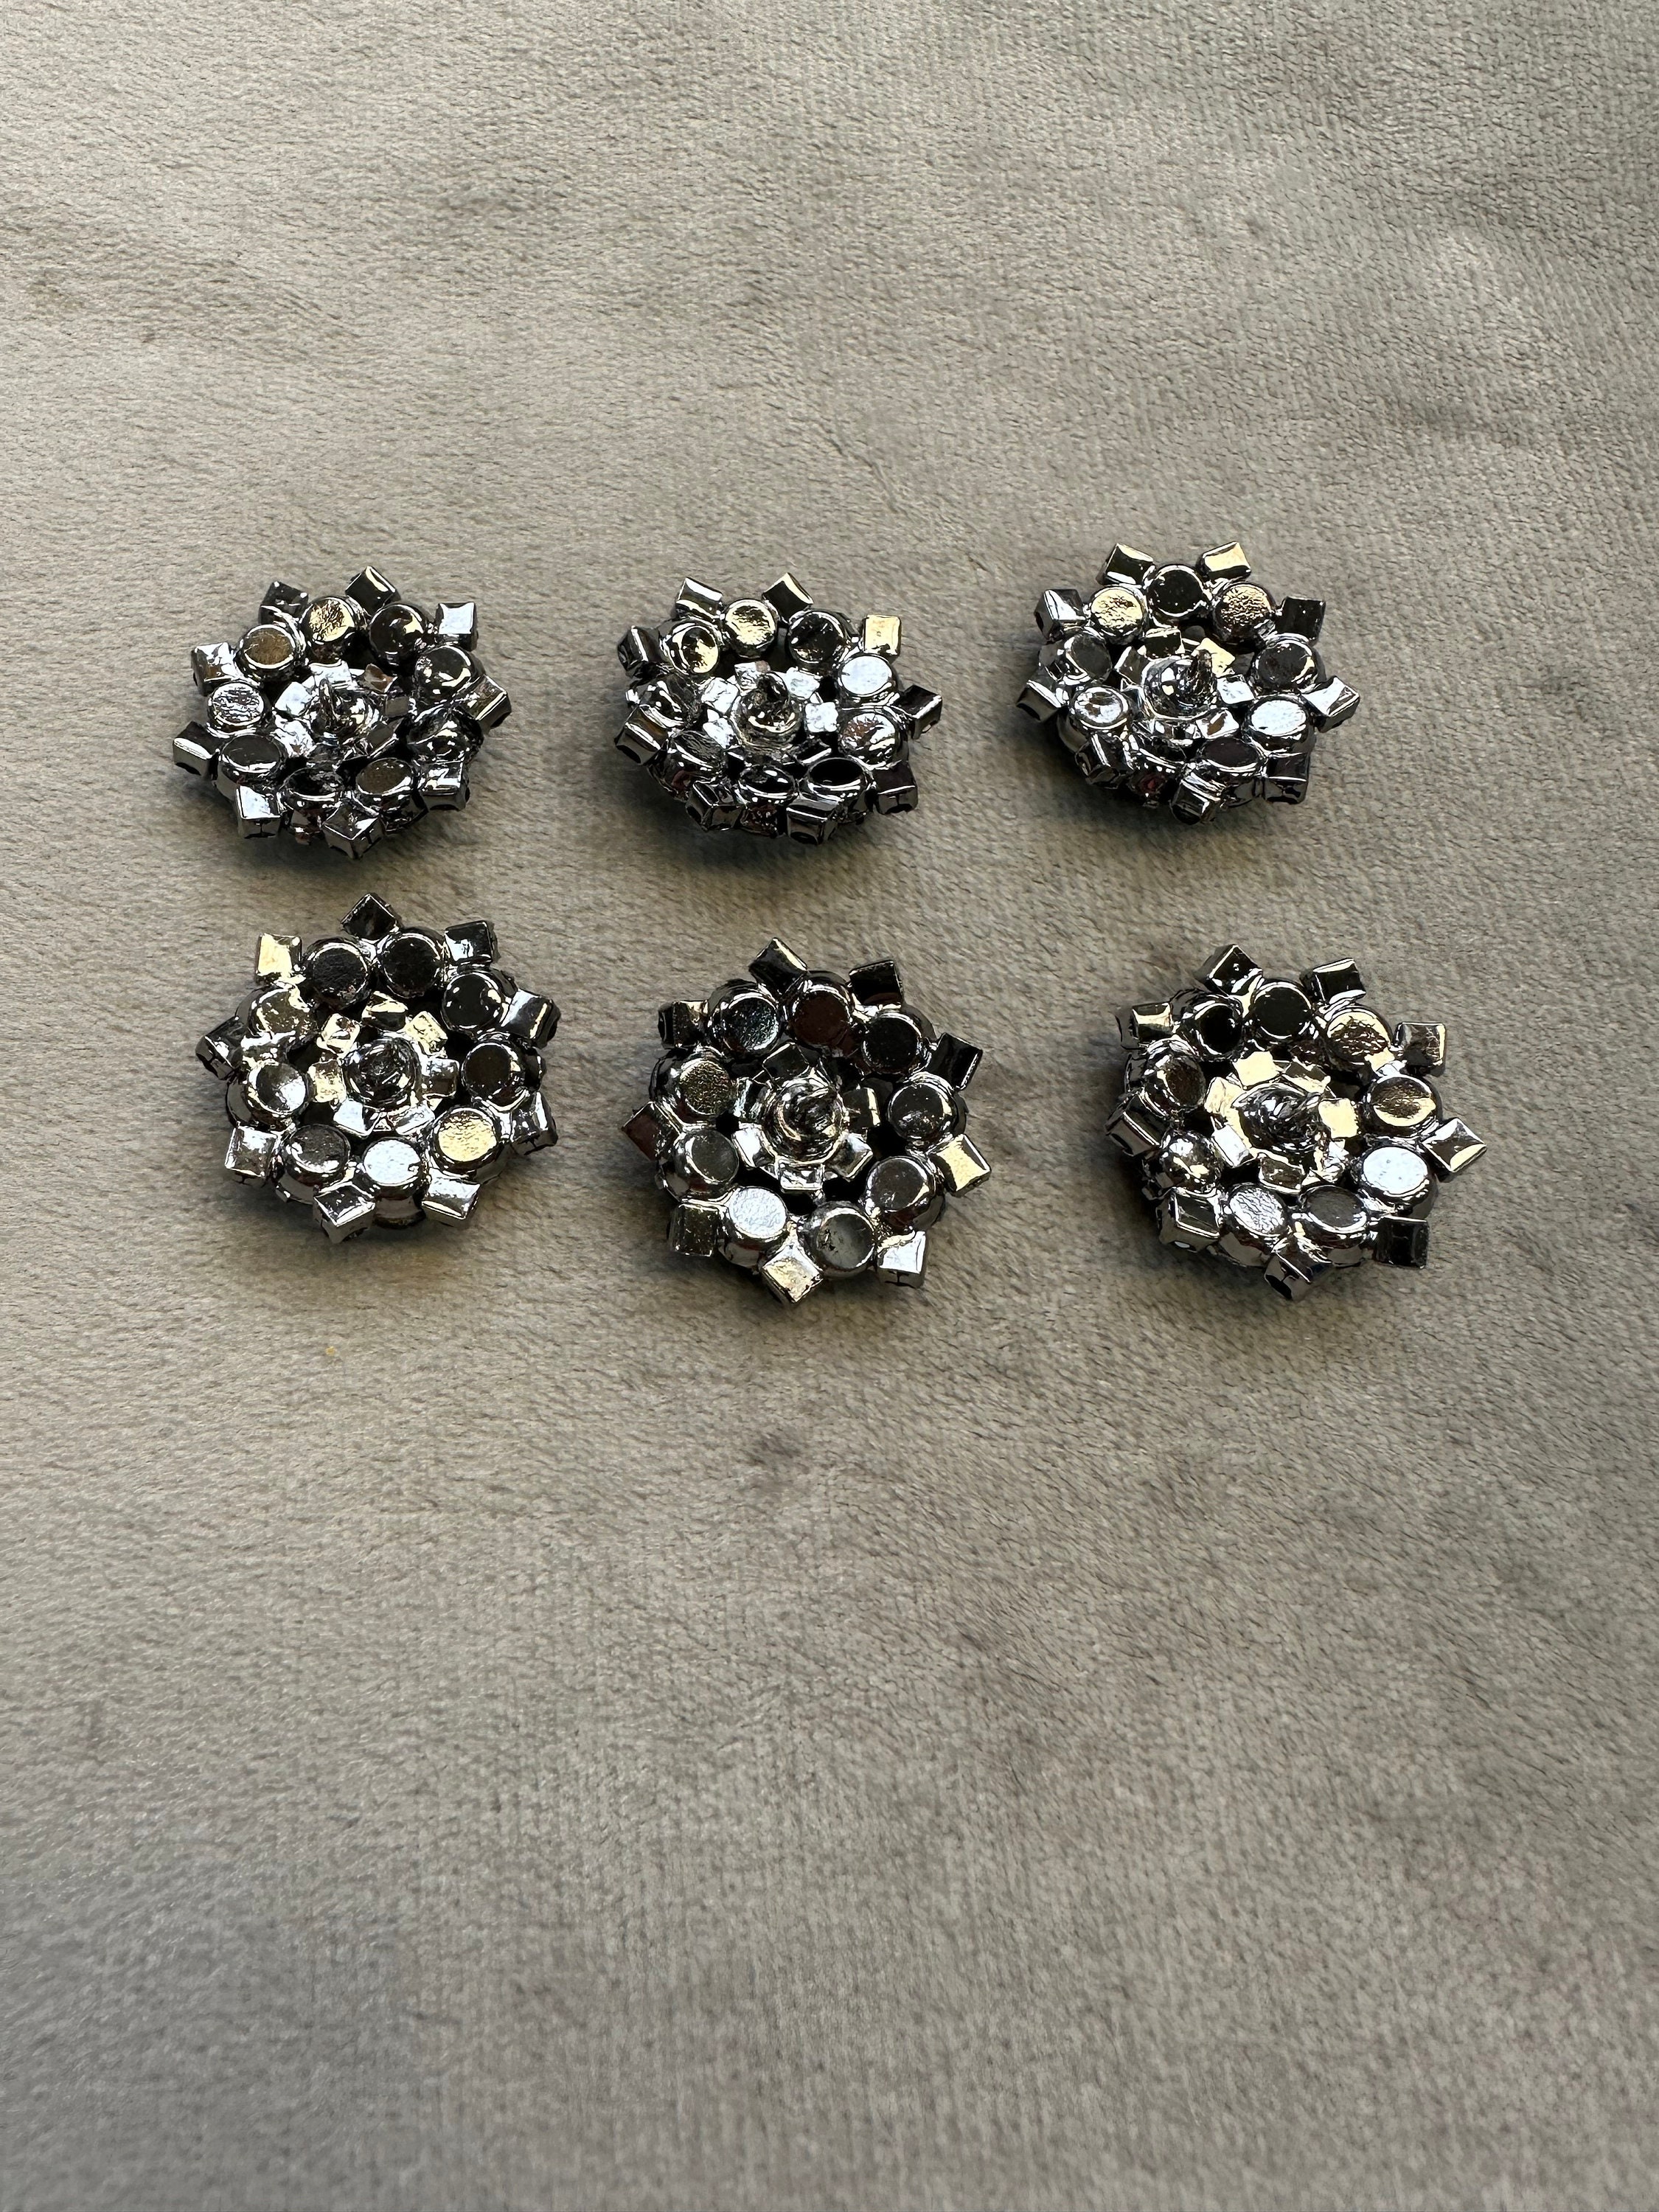  Black Rhinestone Buttons for Clothing 7/8 Inch Embellishments  Buttons Bulk with Metal Shank Flower Rhinestone Buttons for Jewelry Making  Decor